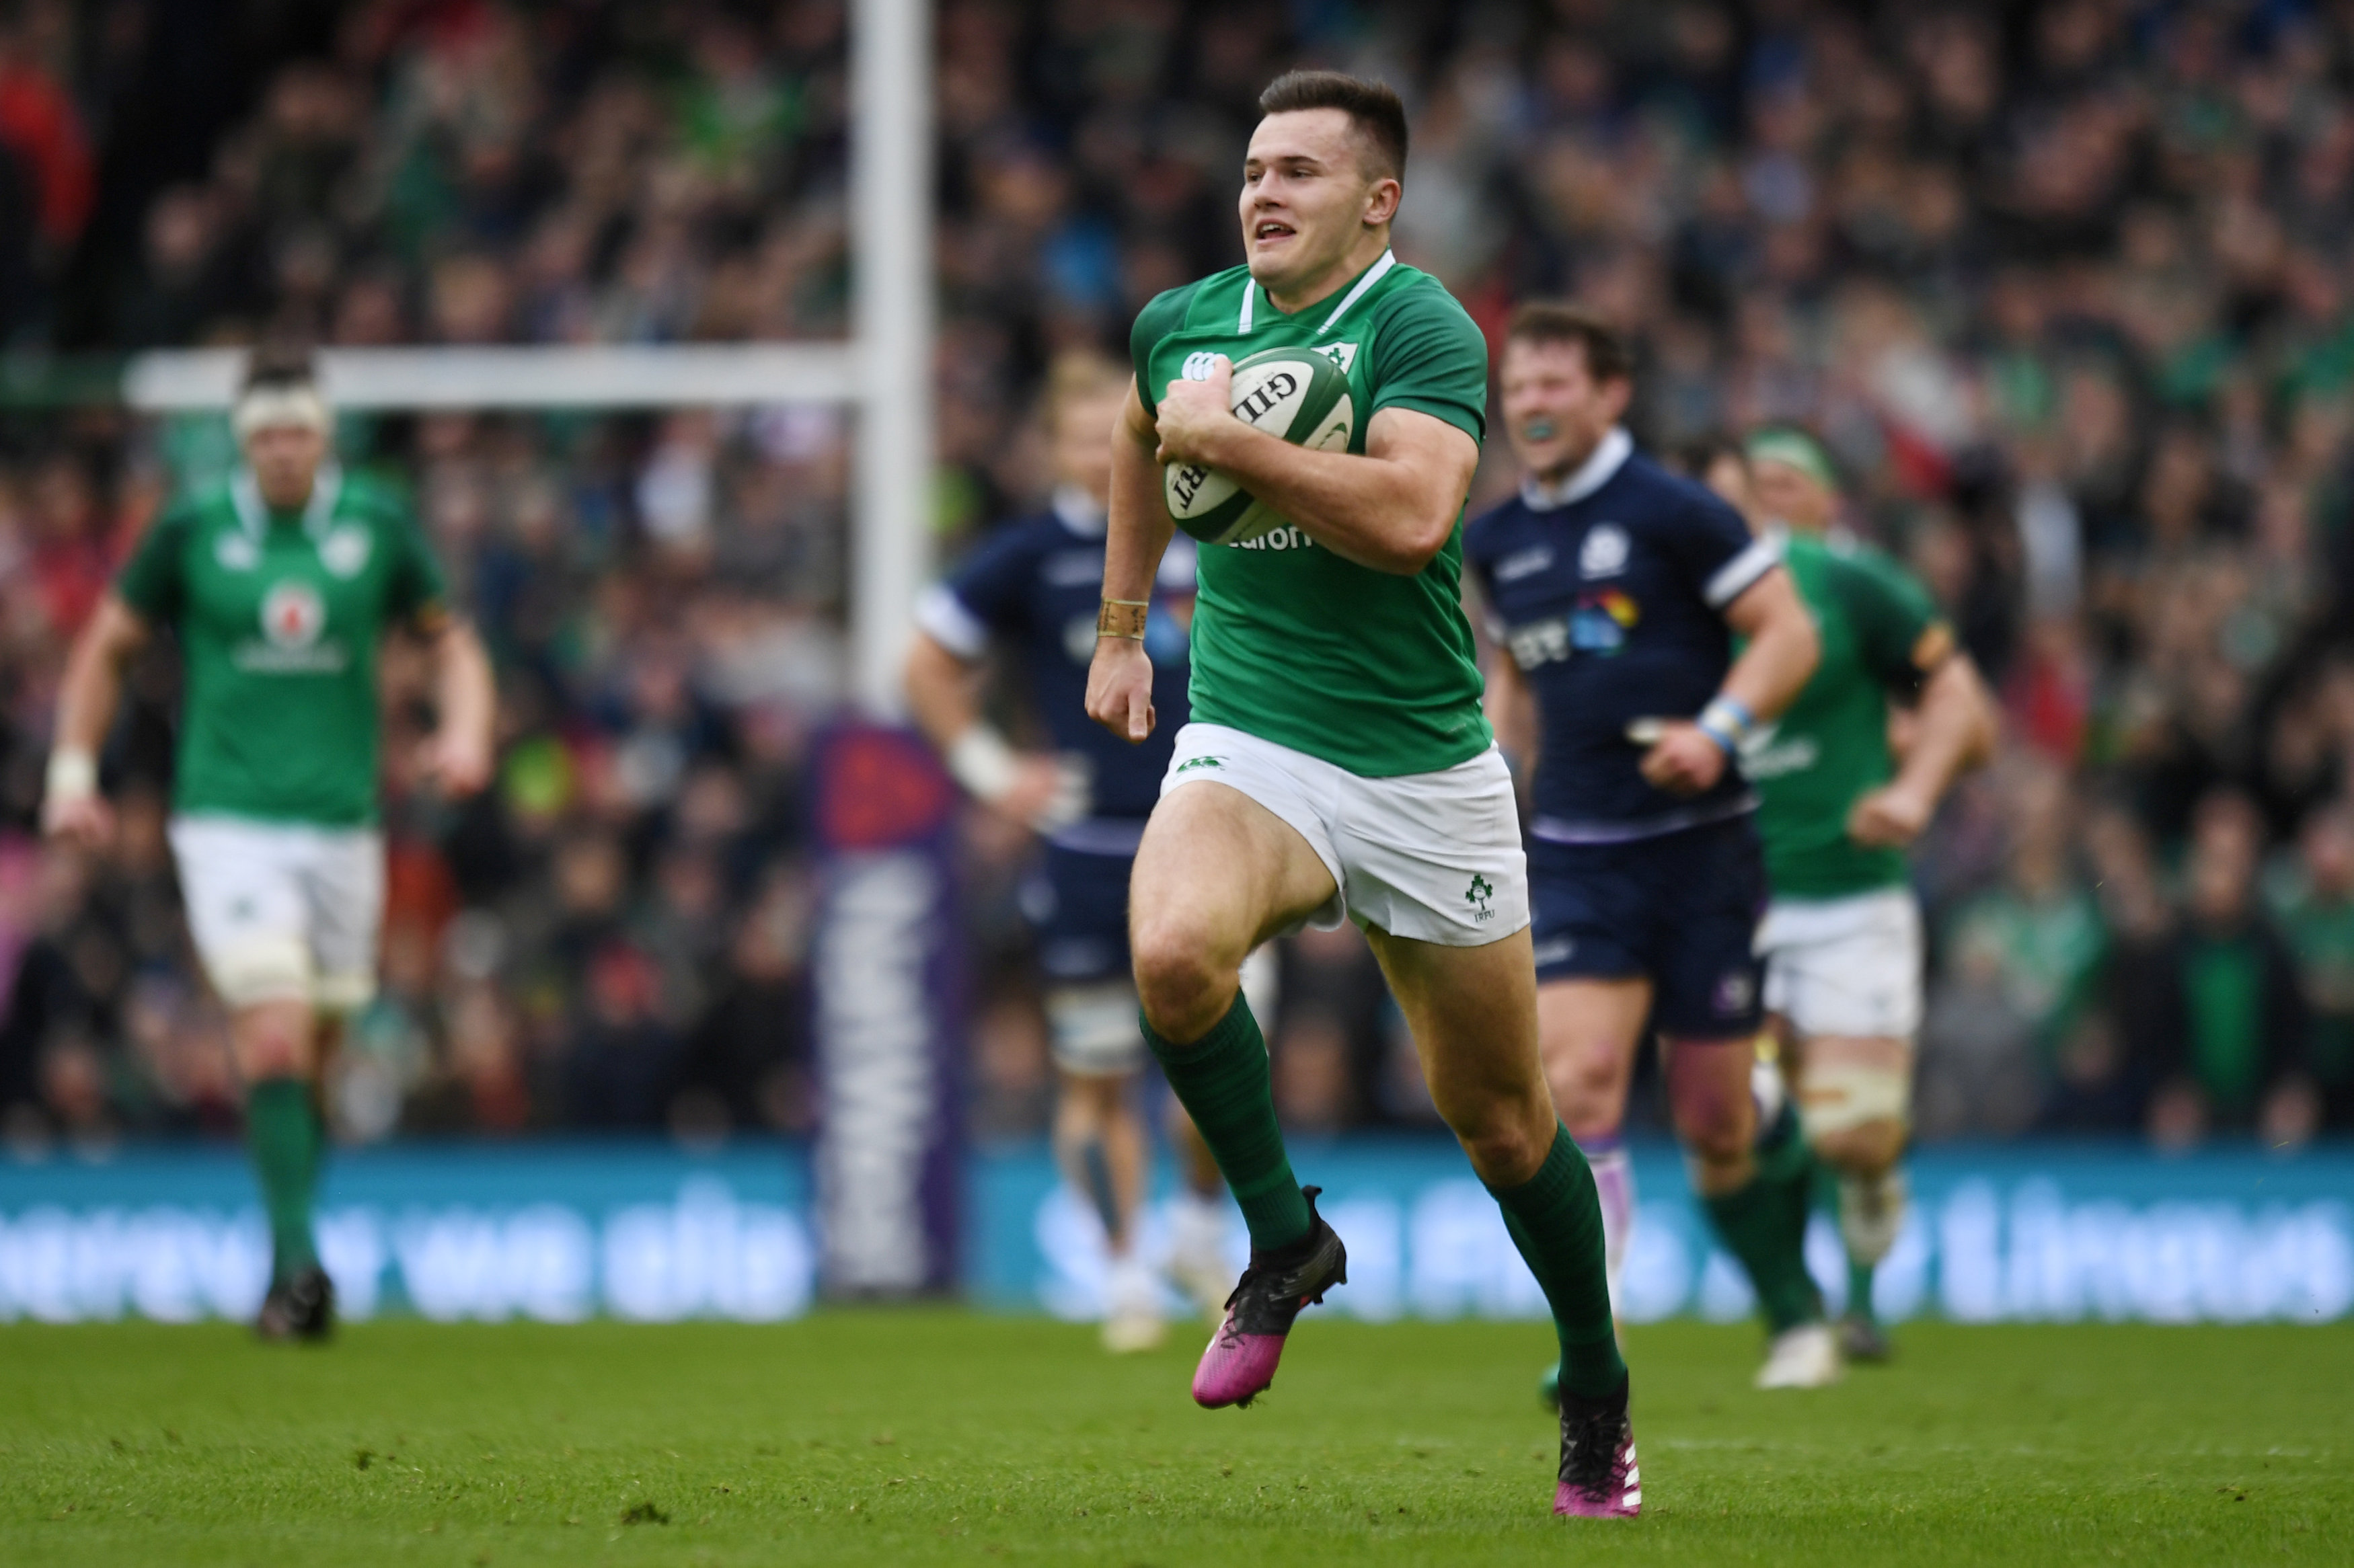 Rugby: Stockdale leads Ireland to victory over Scotland